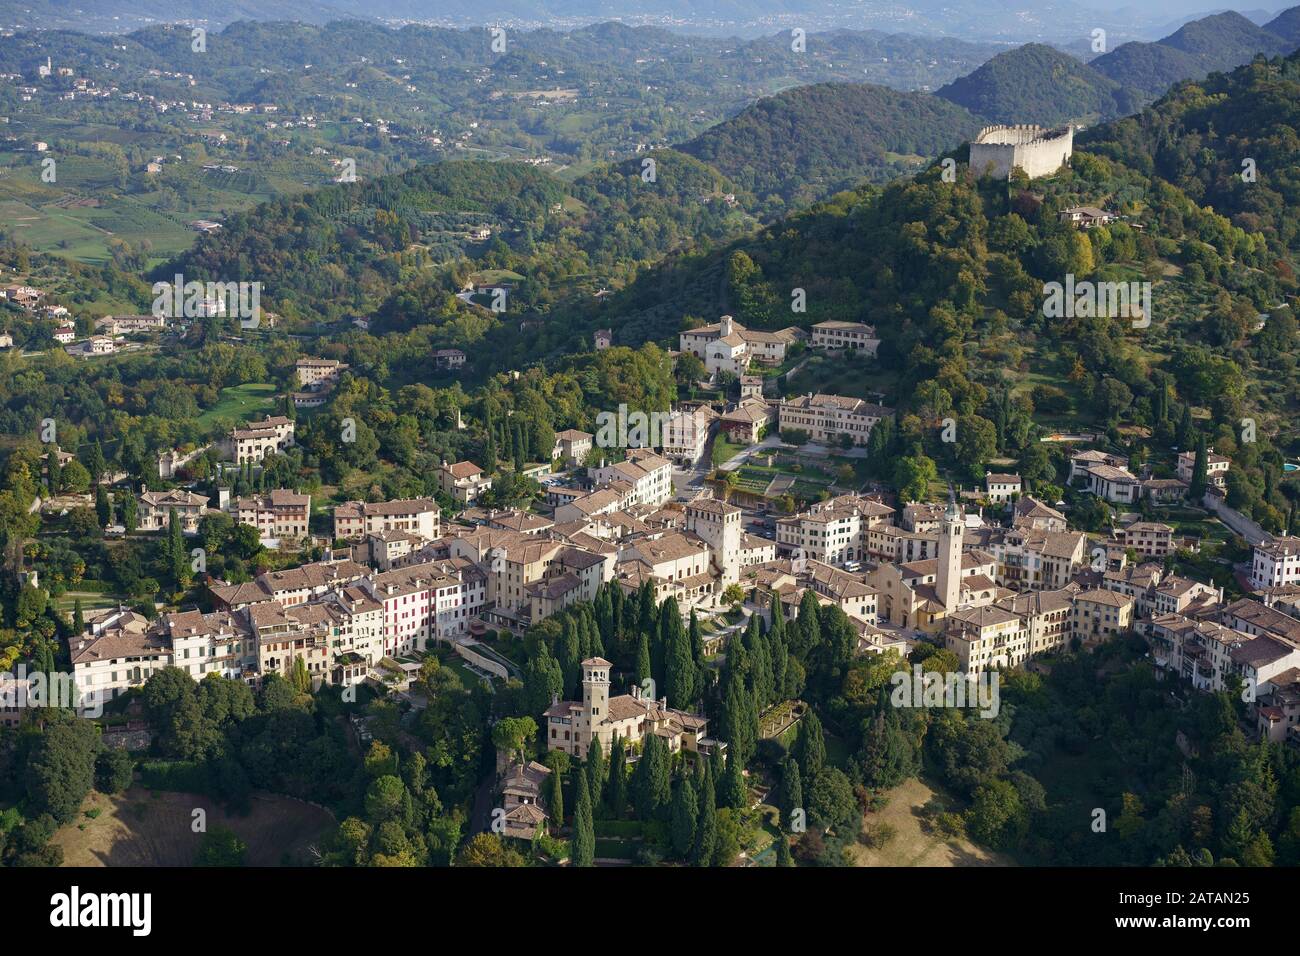 AERIAL VIEW. Picturesque town on green rolling hills. Asolo, Veneto, Italy. Stock Photo